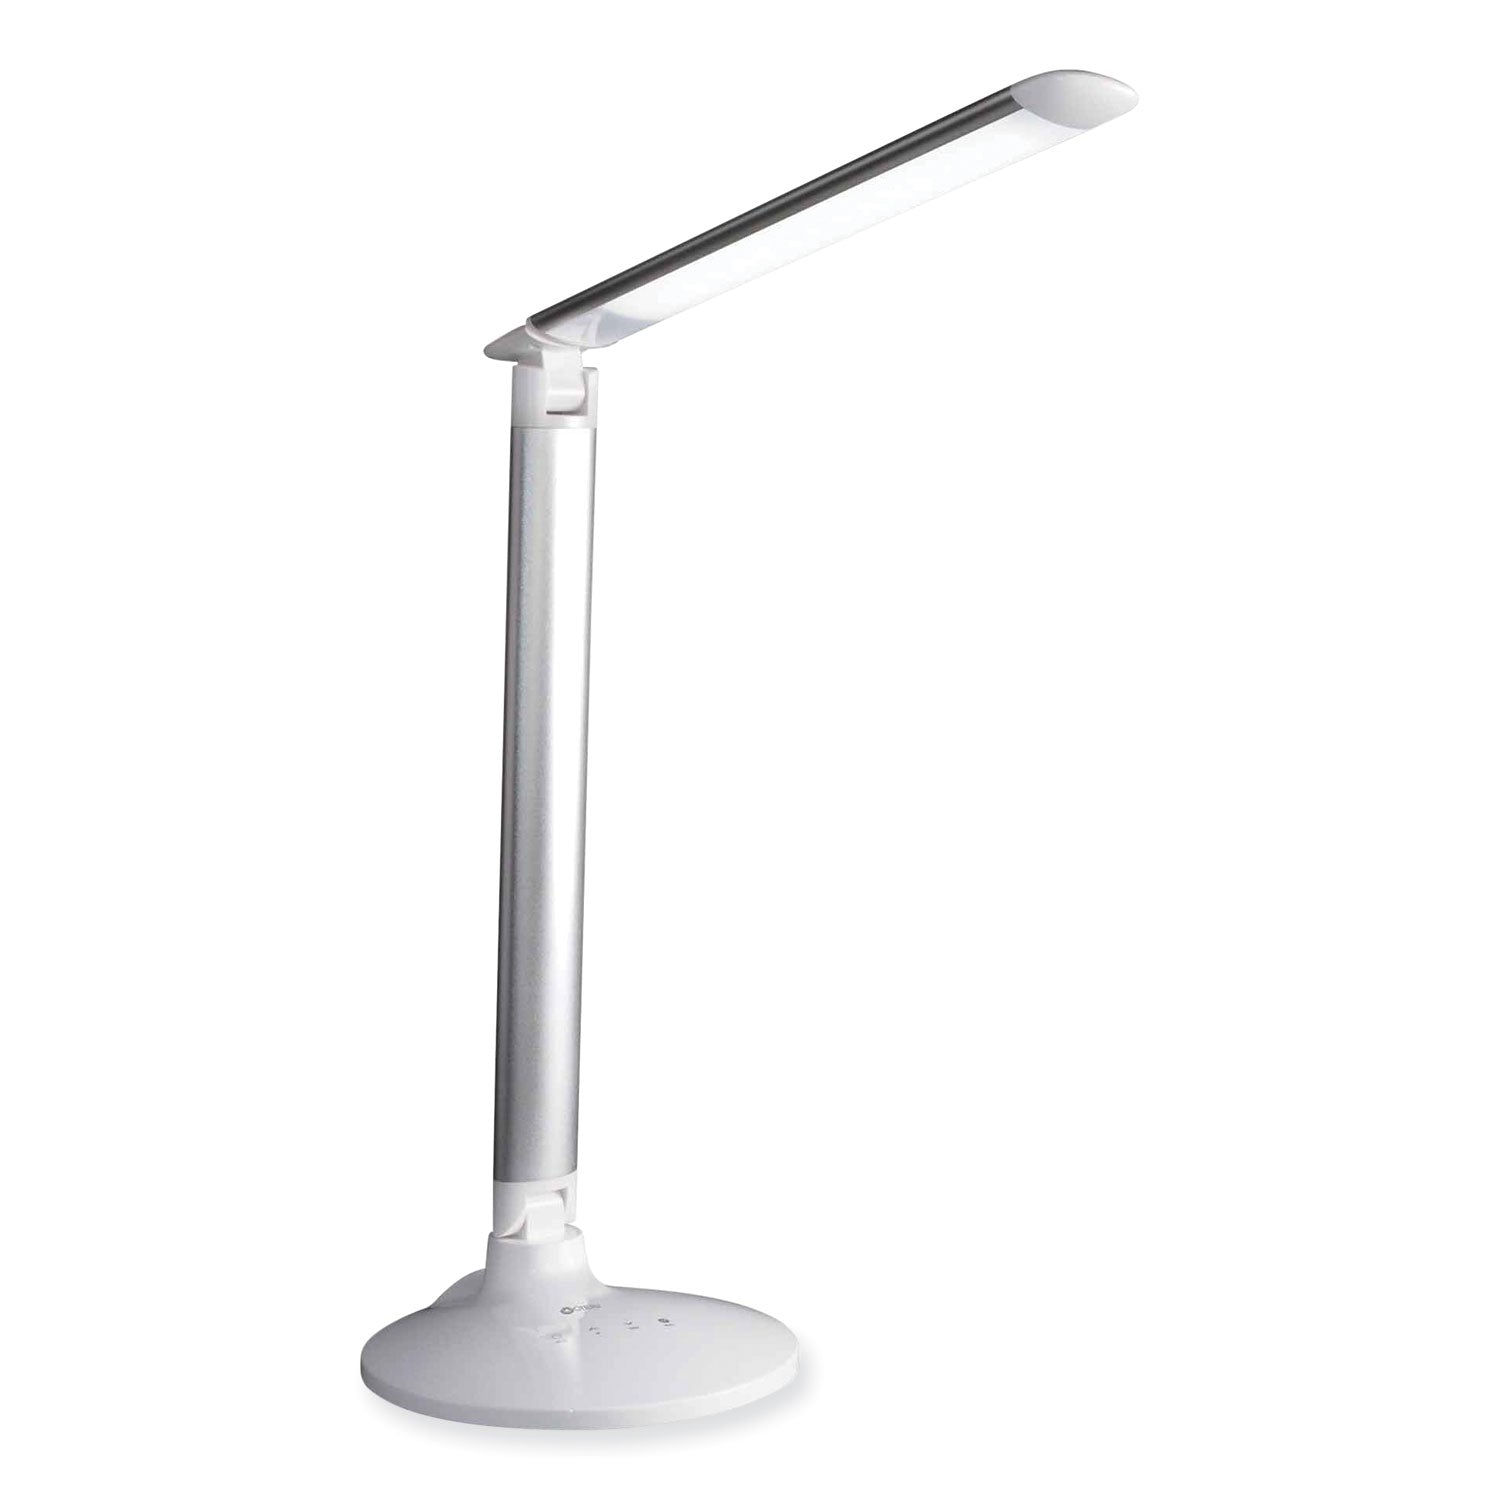 wellness-series-command-led-desk-lamp-with-voice-assistant-1775-to-29-high-silver-ships-in-4-6-business-days_ottcs59029shpr - 1